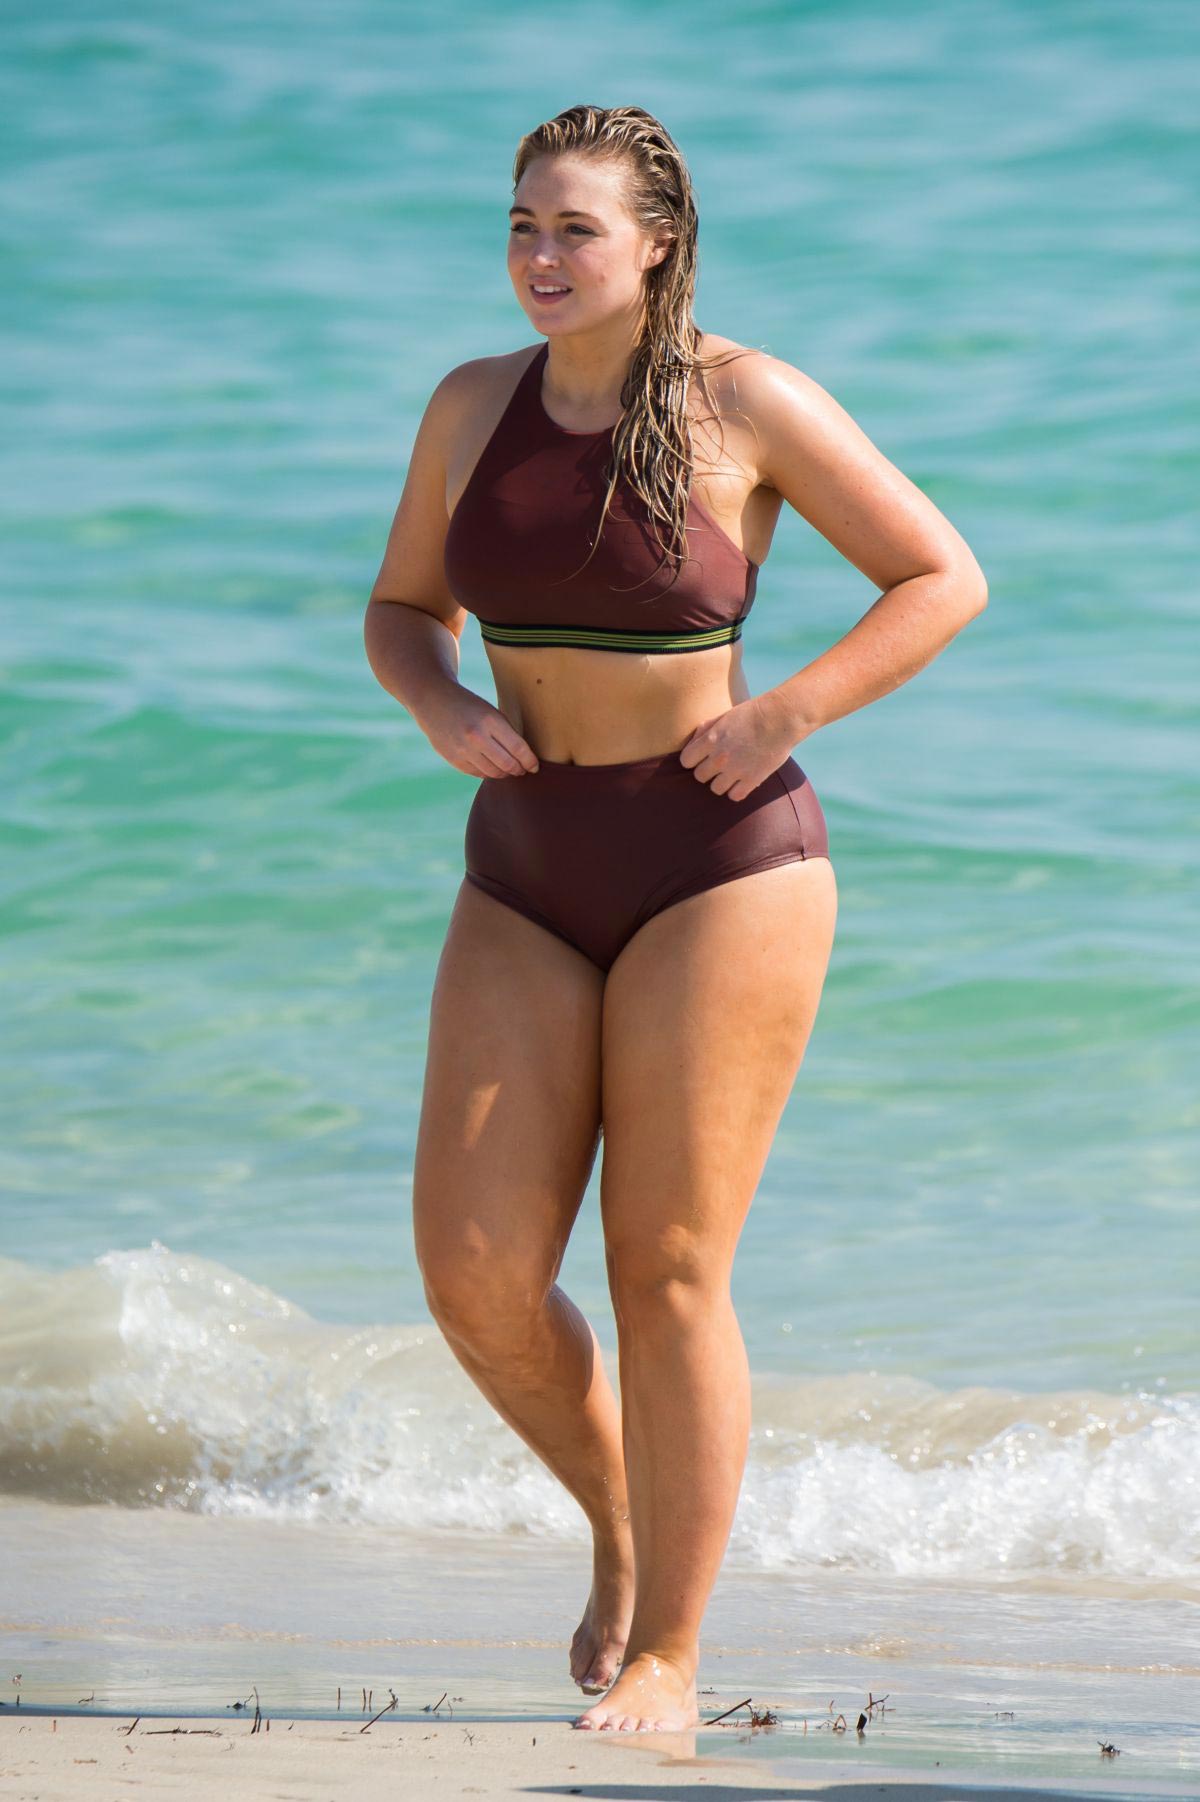 Iskra Lawrence in Brown Color Bikini for Aerie Photoshoot at a Beach in Miami 2018/11/26